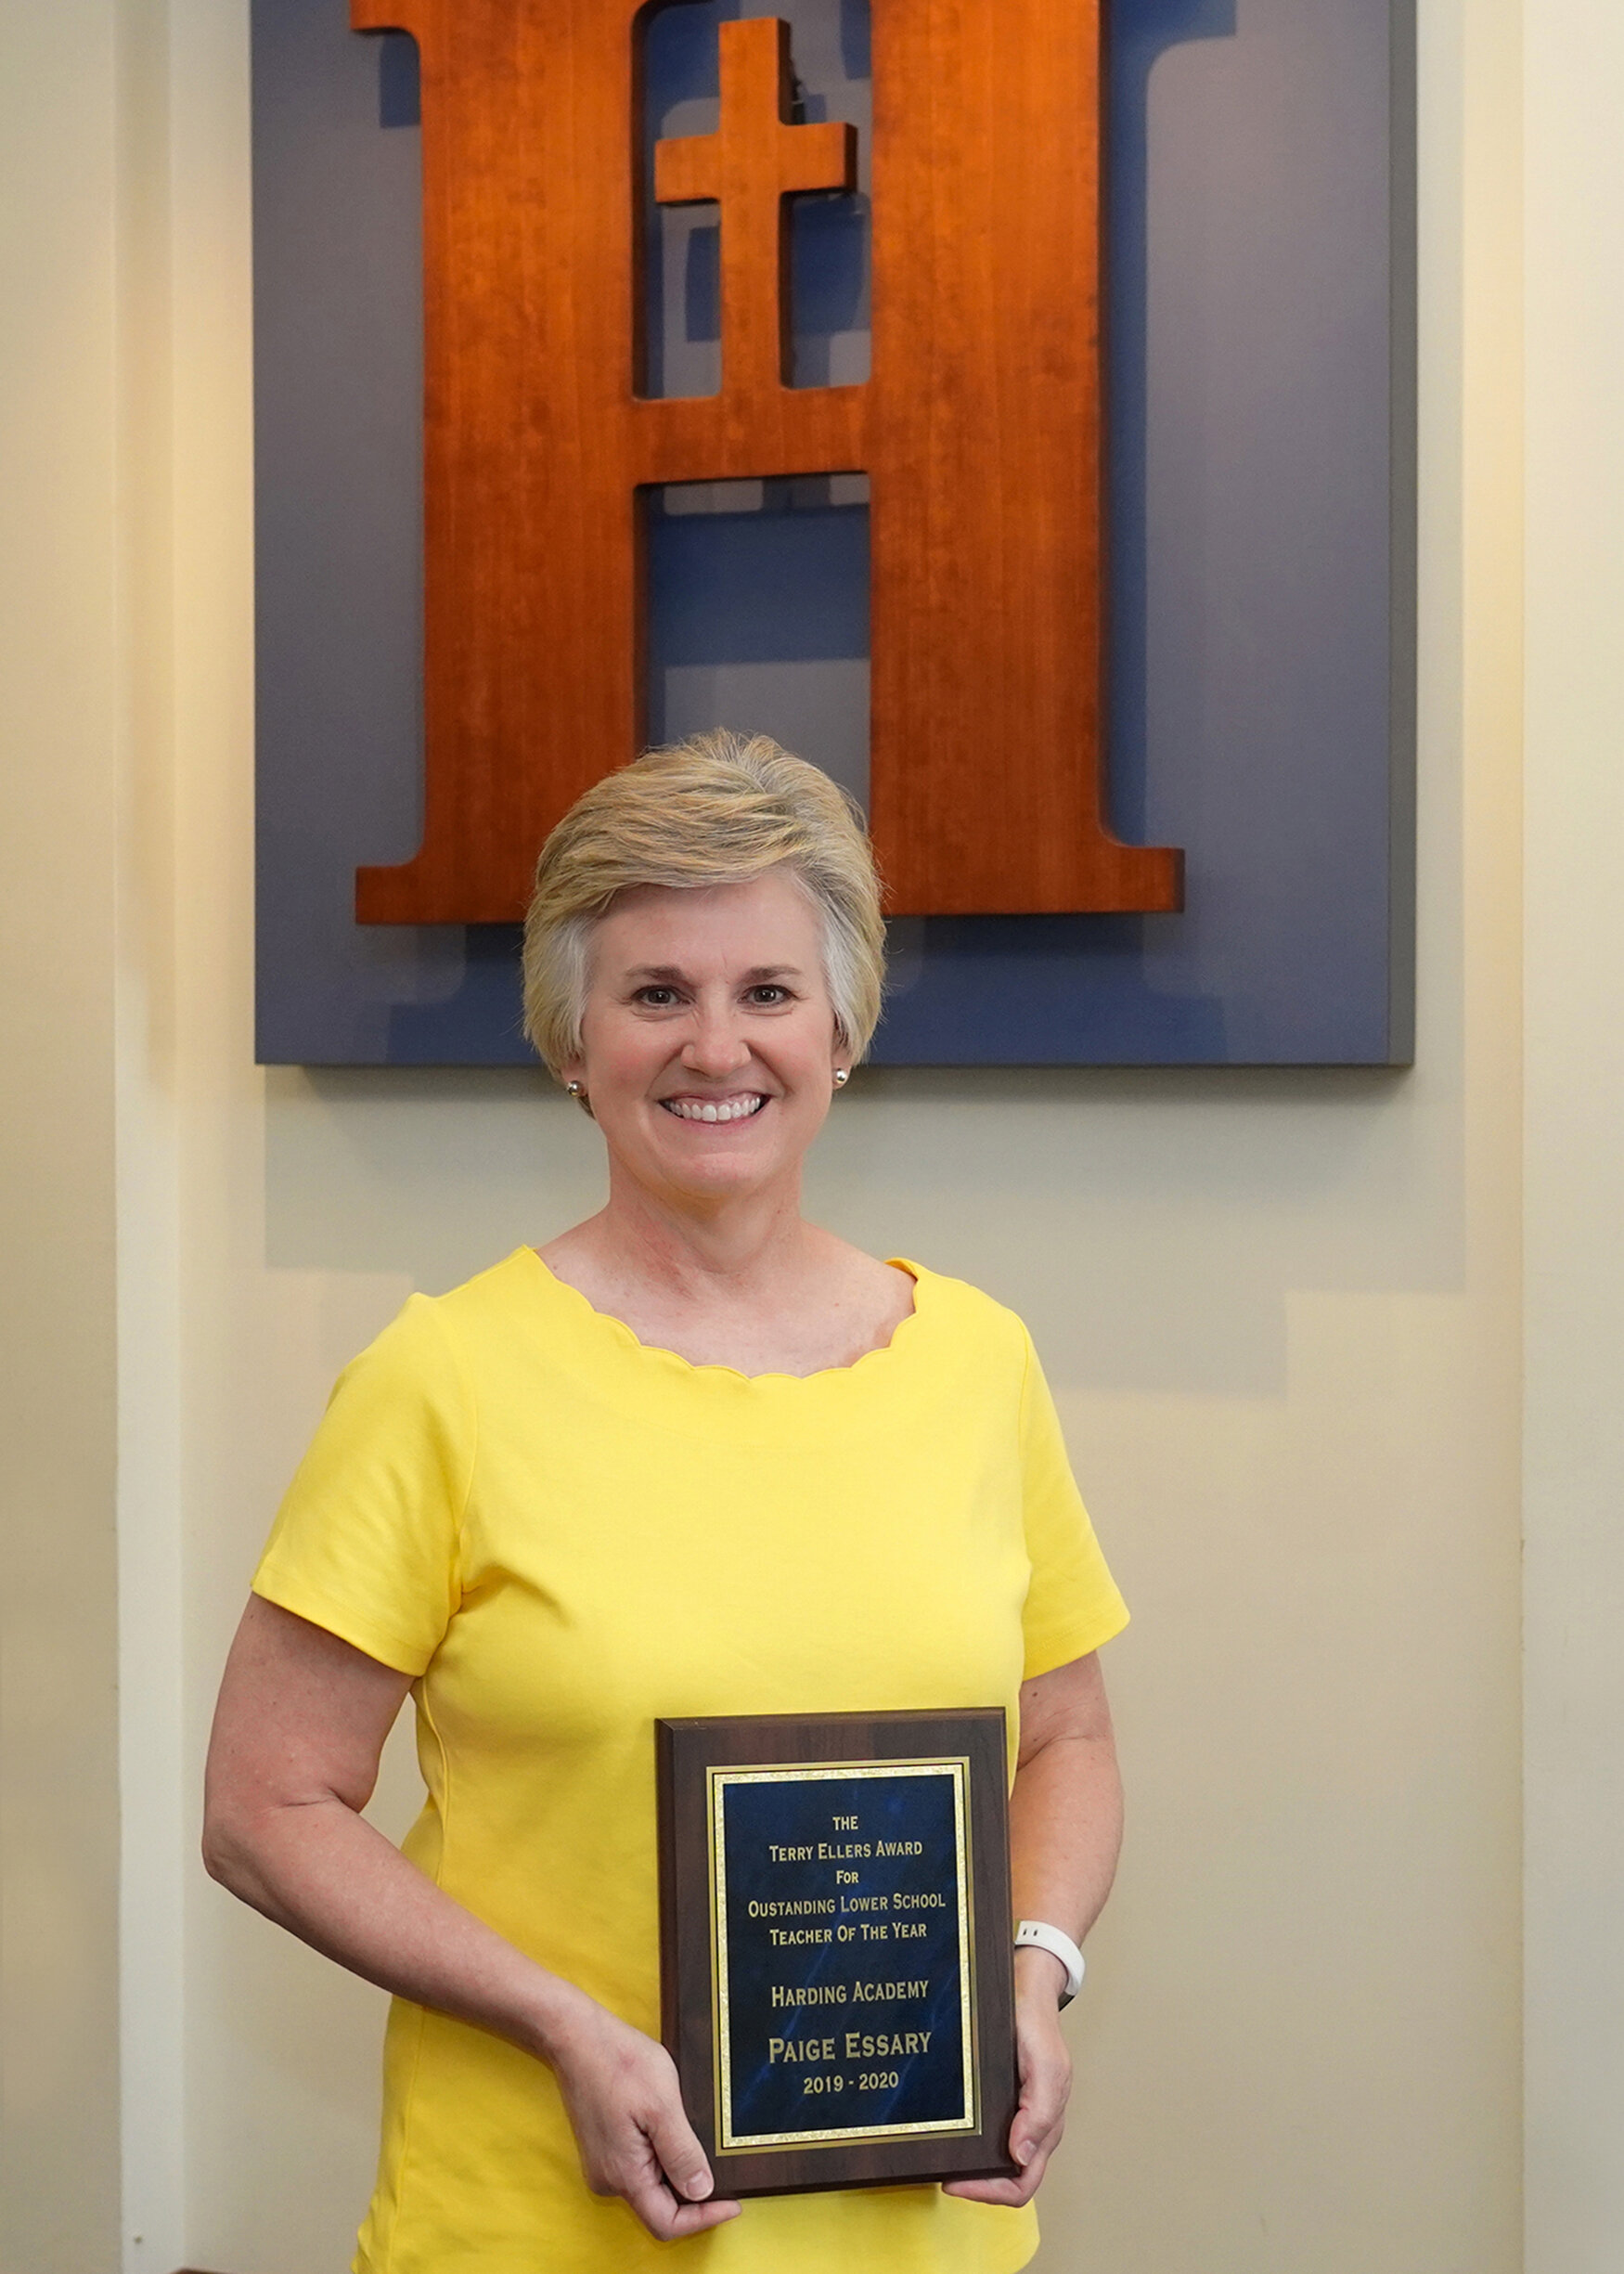 Paige Essary—The Terry Ellers Award for Outstanding Lower School Teacher of the Year